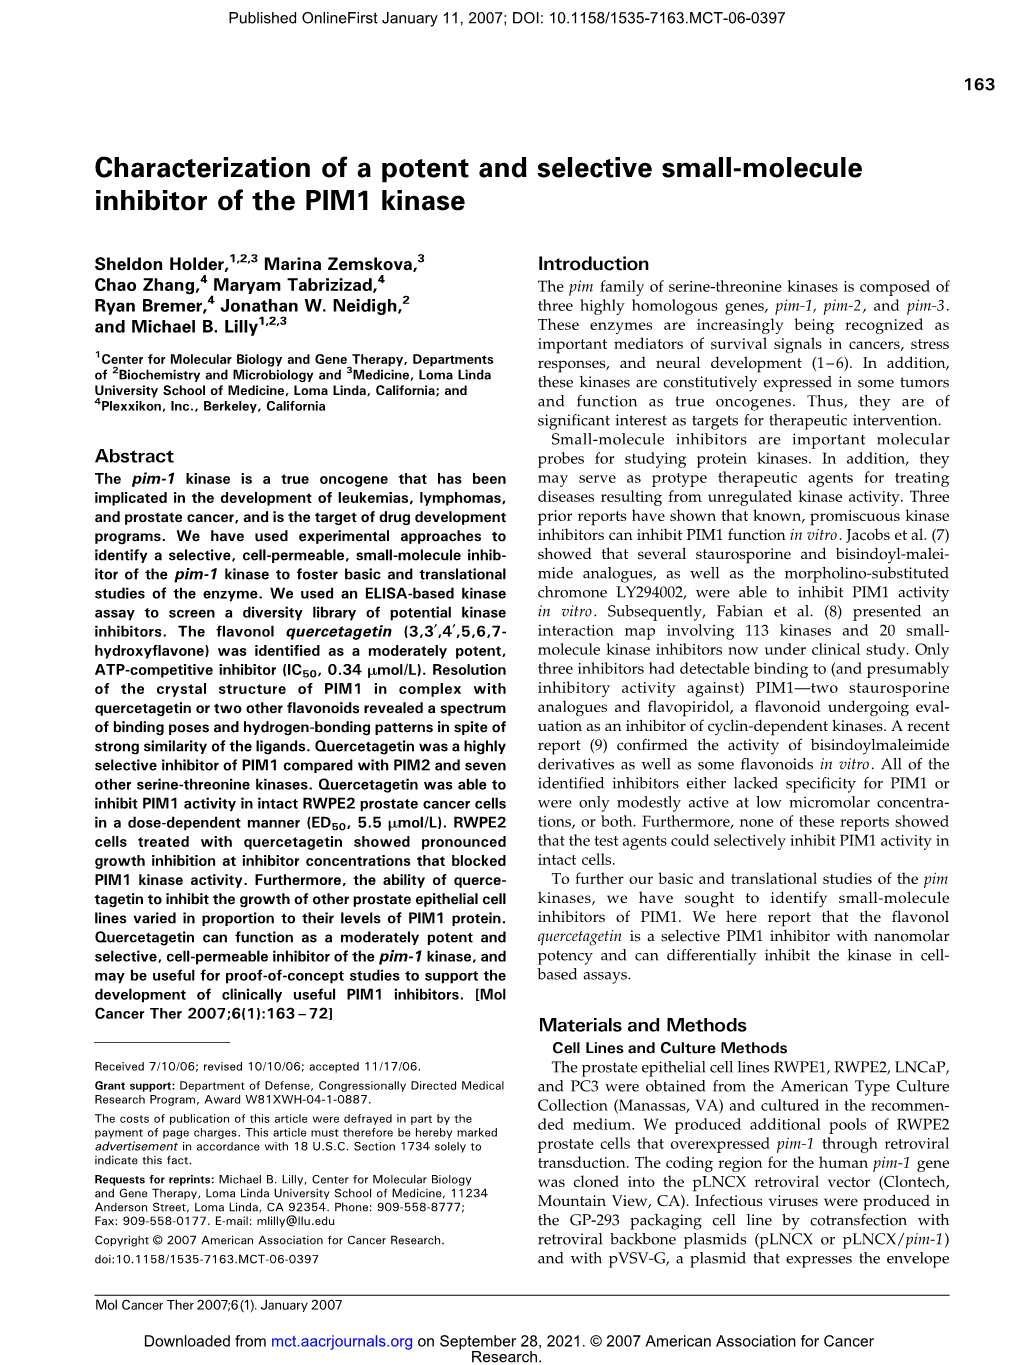 Characterization of a Potent and Selective Small-Molecule Inhibitor of the PIM1 Kinase